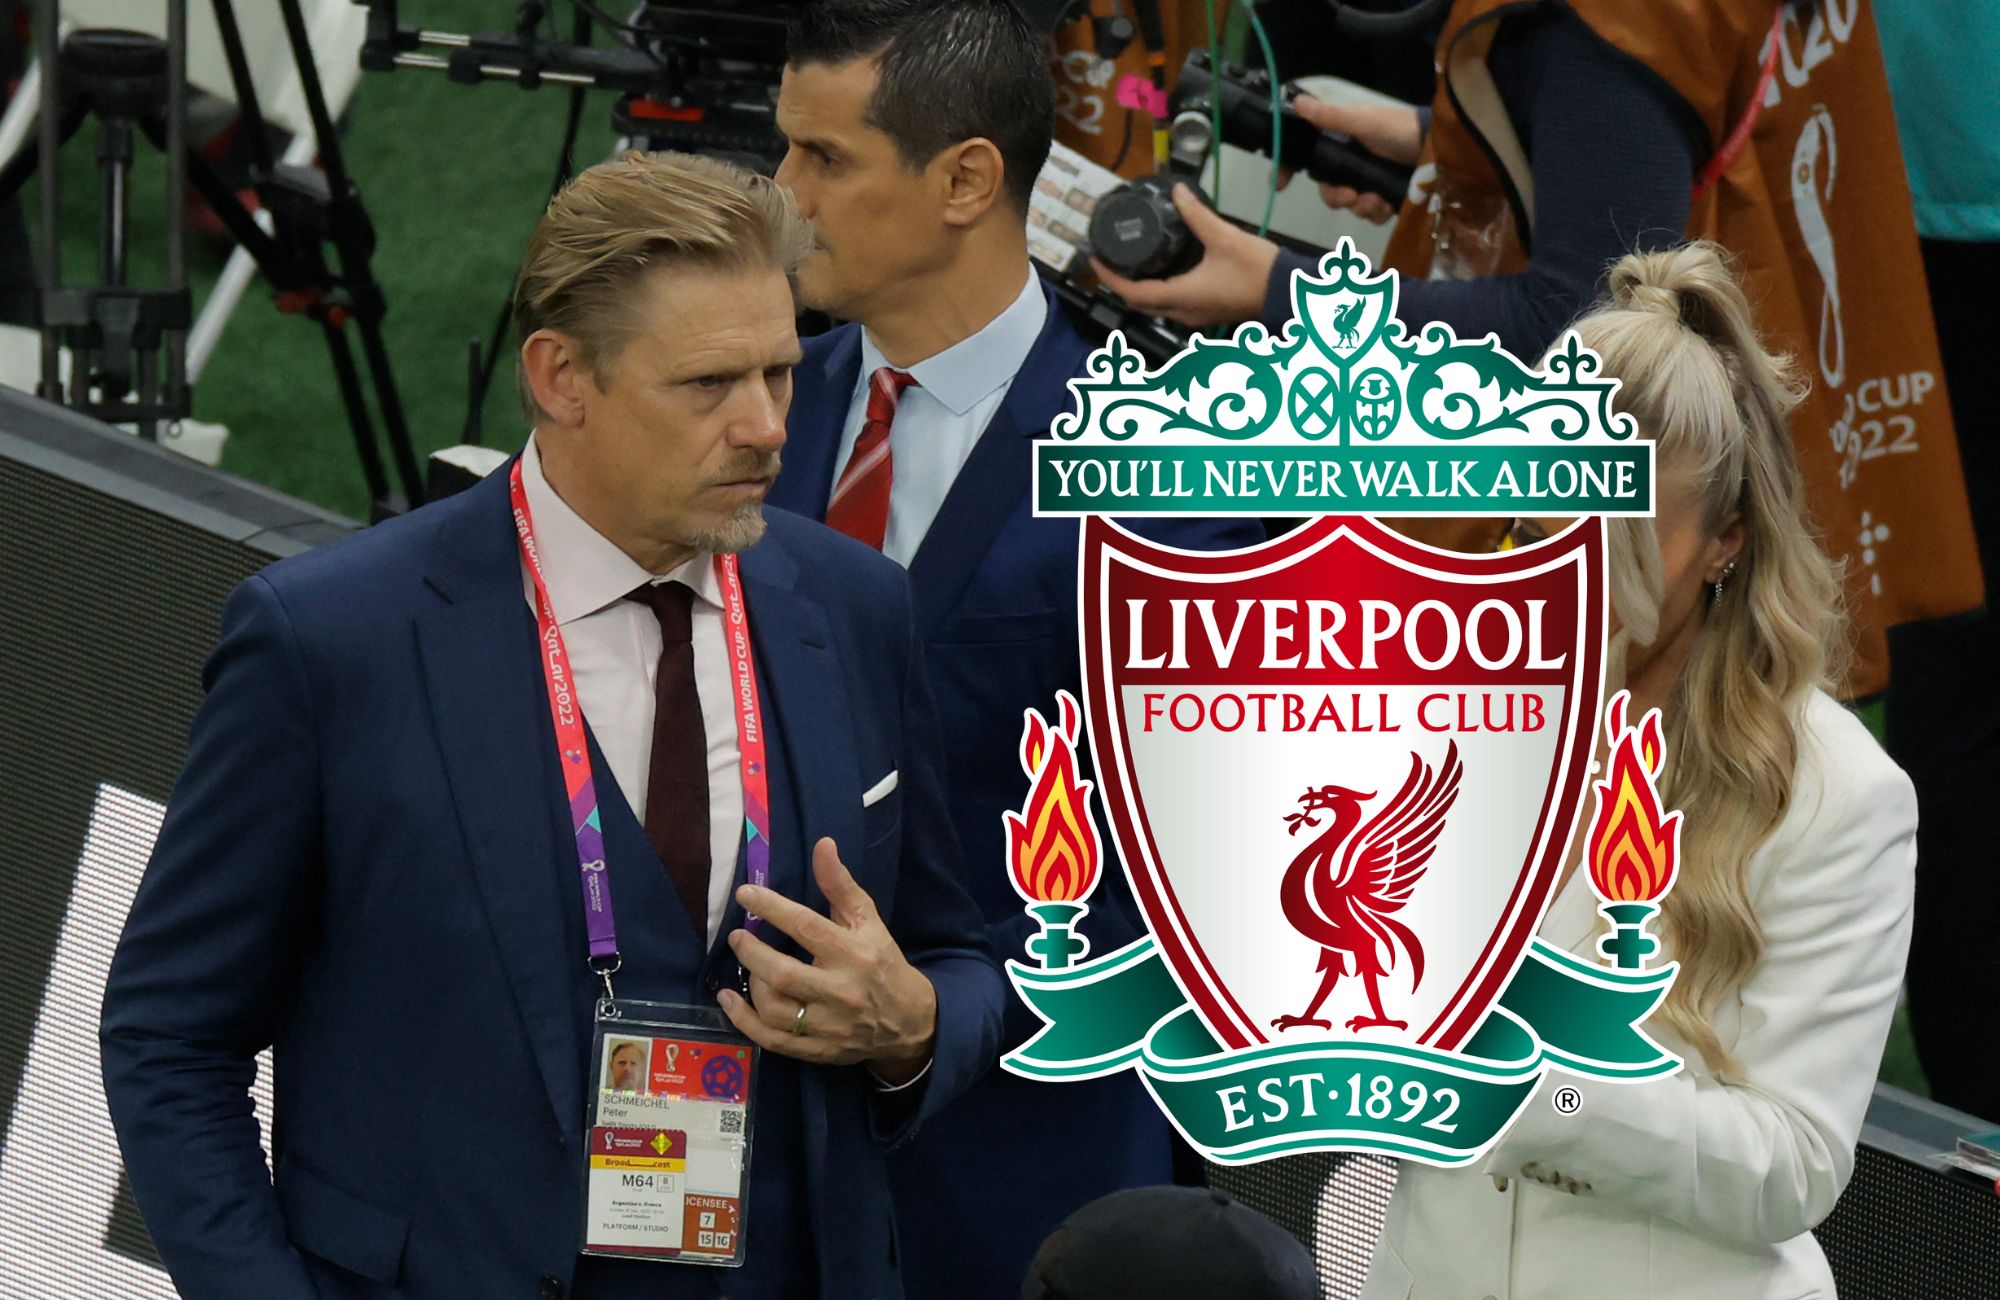 Liverpool’s 7-0 Man Utd romp has boosted chances of signing ‘complete’ midfielder, PL legend claims